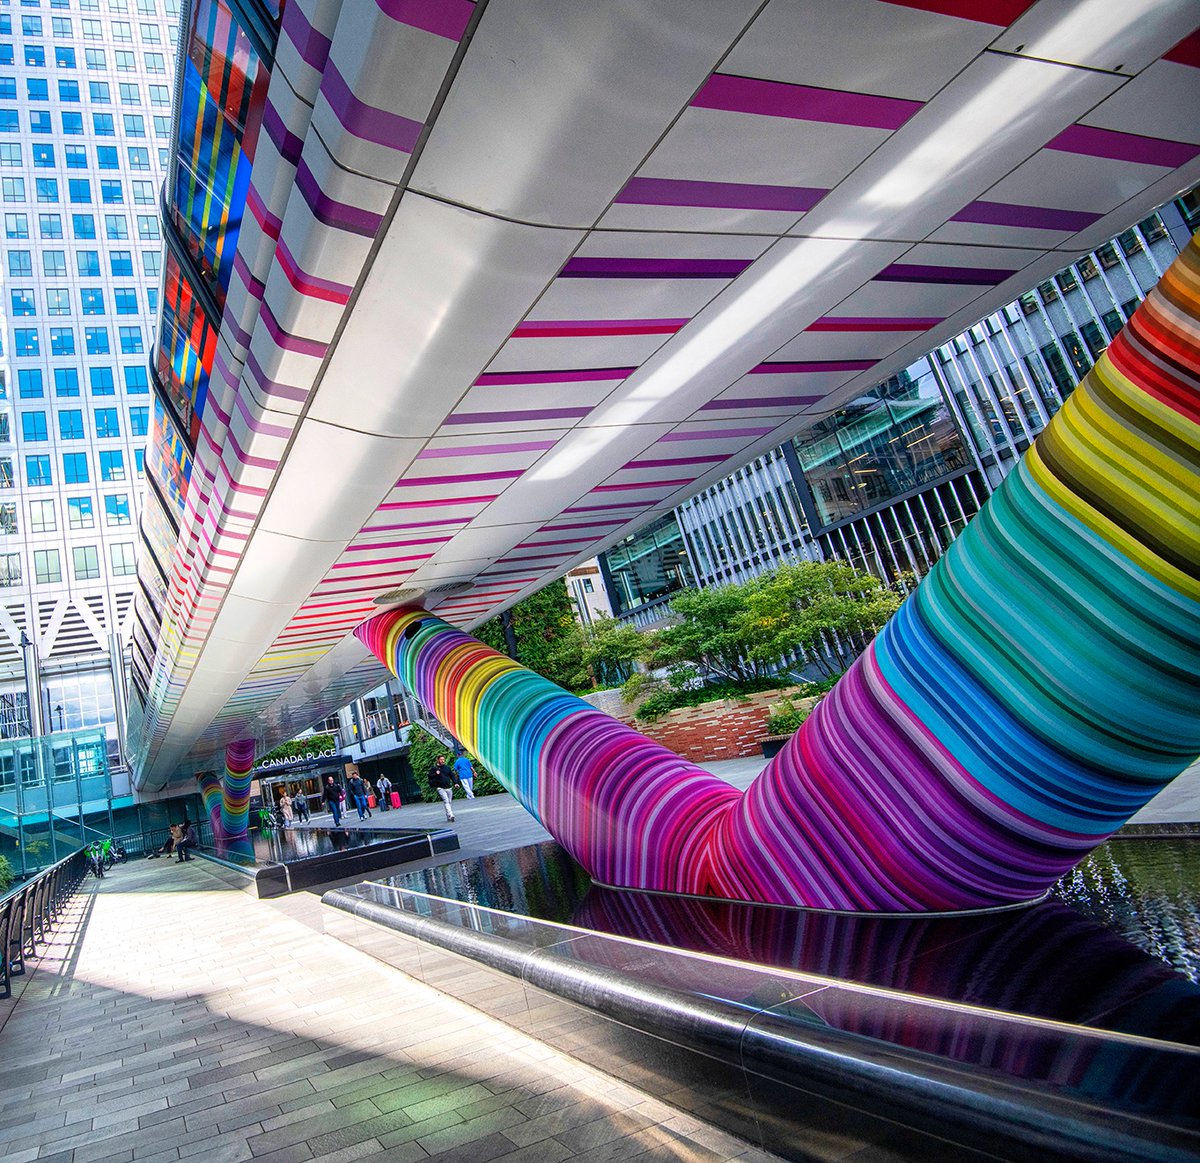 Adams Plaza Bridge I love photographing this bridge in Canary Wharf, even more so now they've added so much colour to the bottom of it....just gorgeous :) #London #CanaryWharf